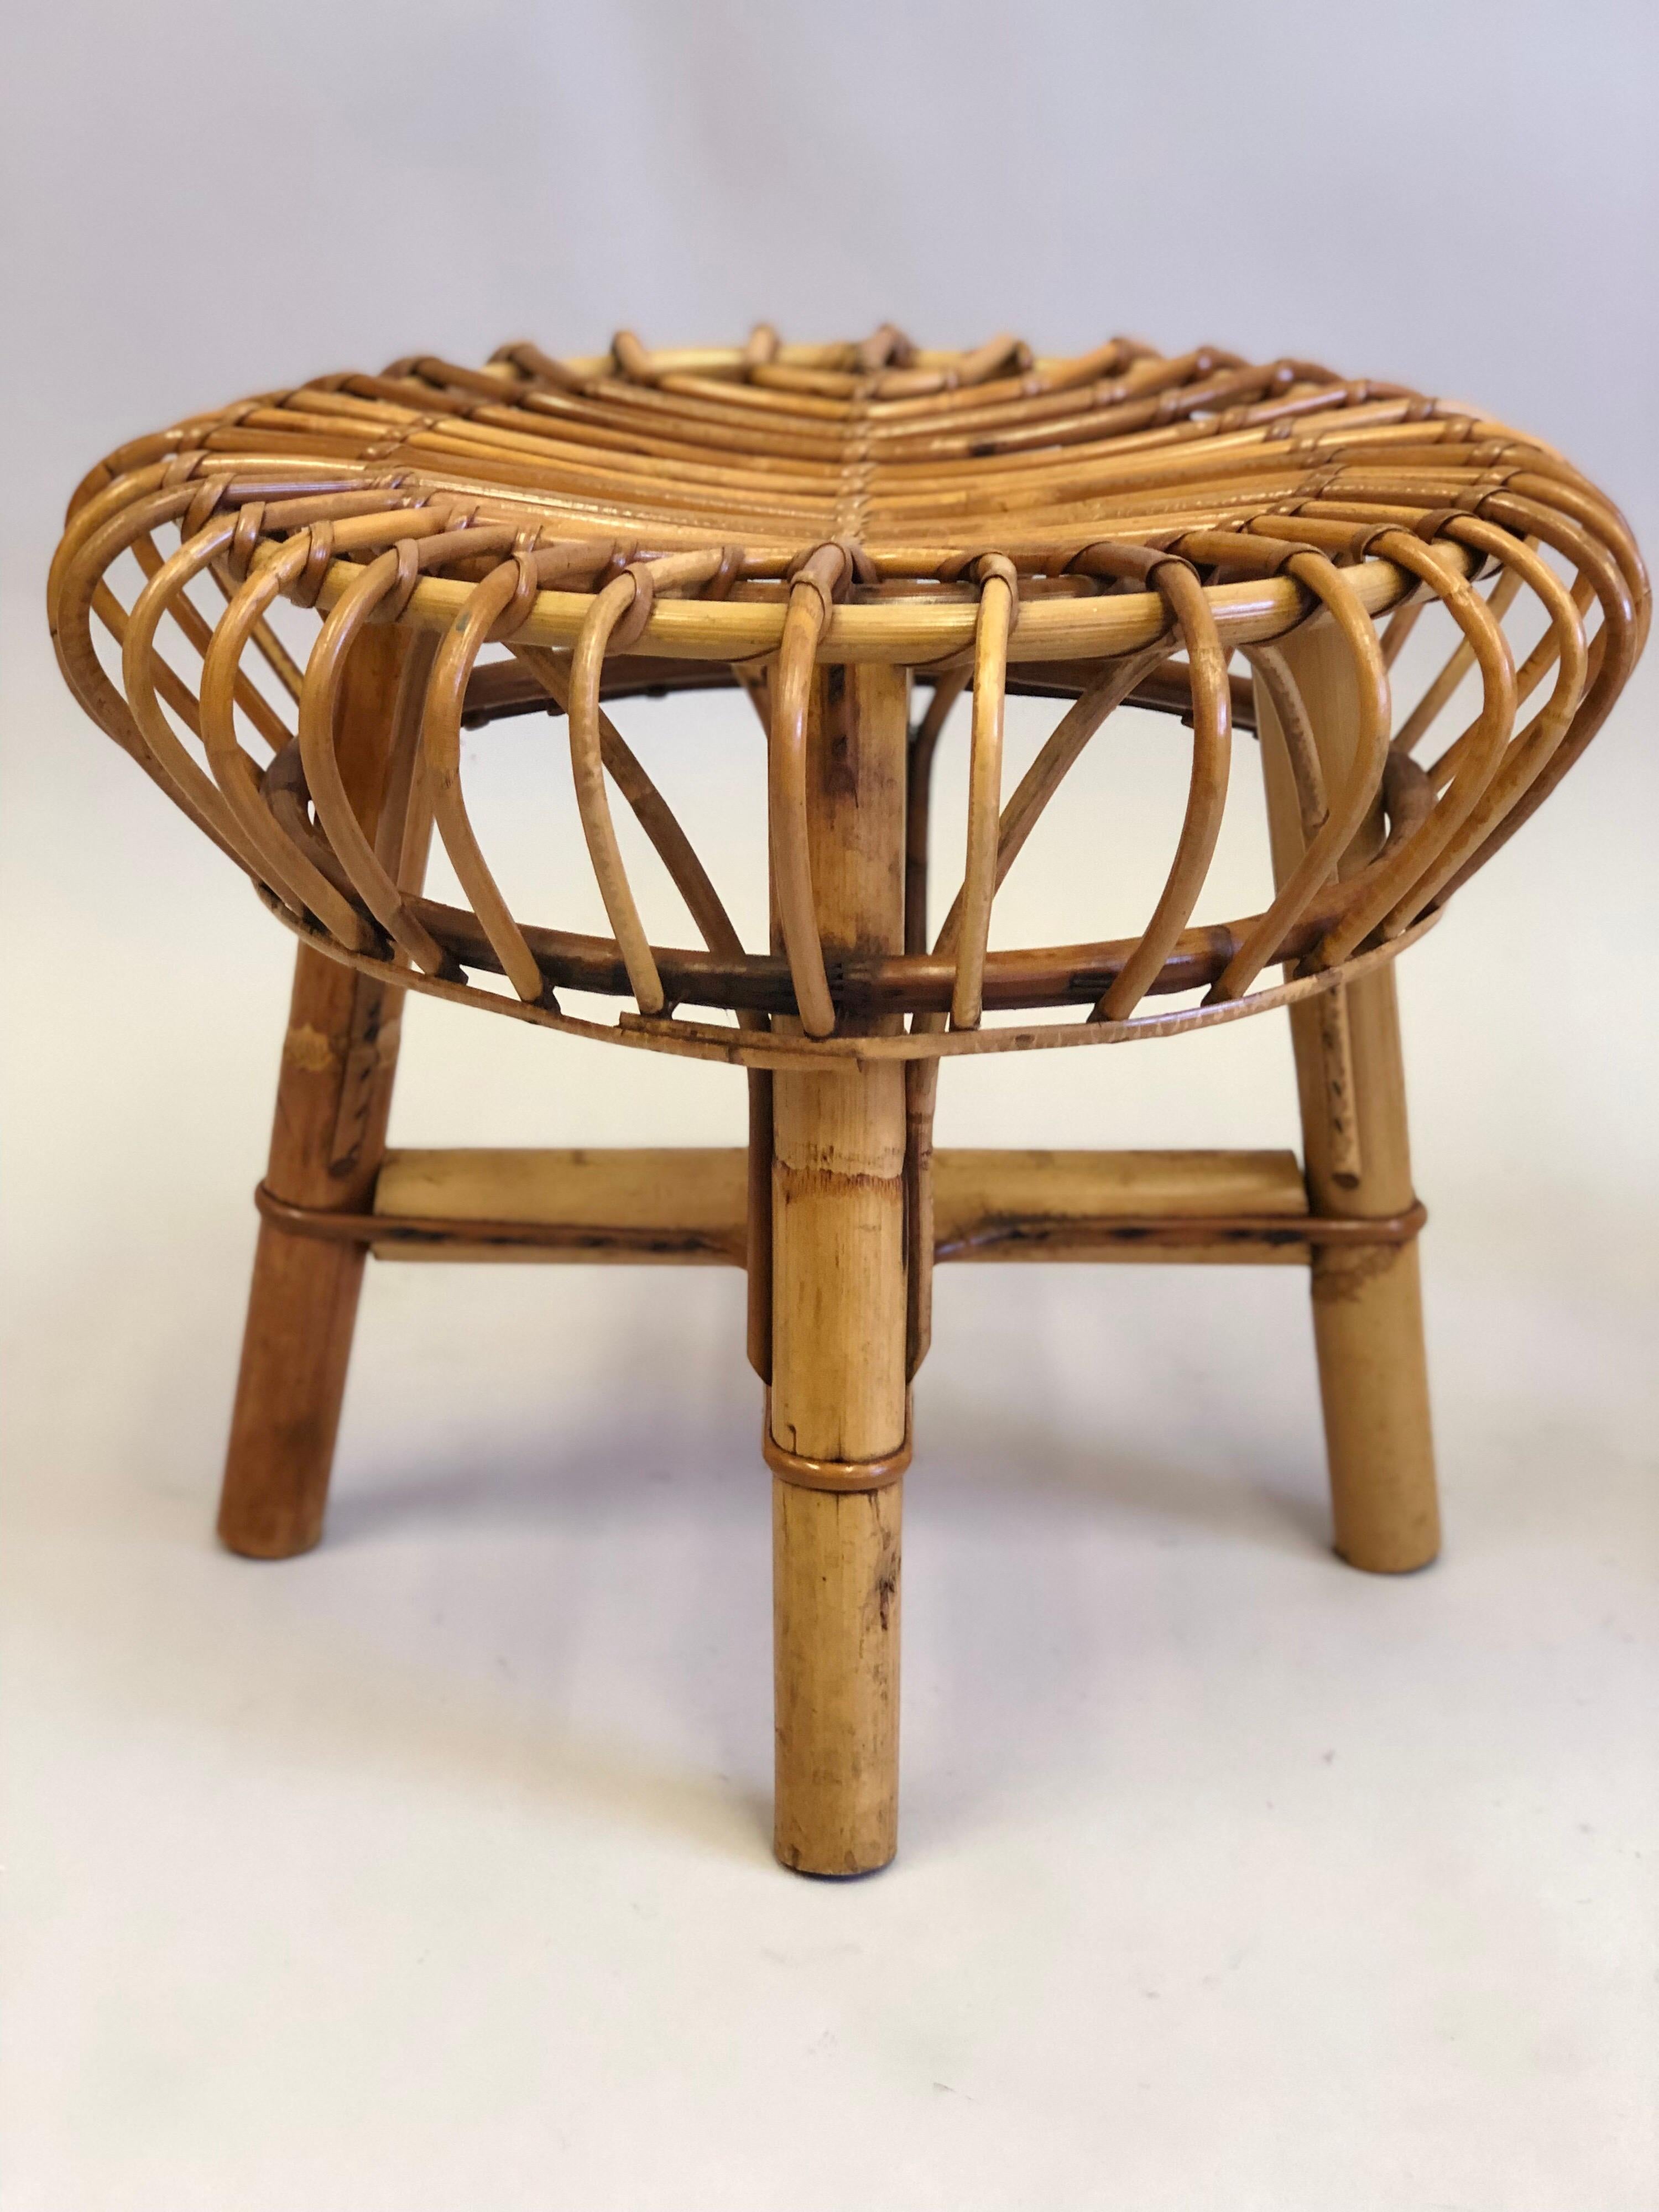 Pair of Italian Mid-Century Modern Rattan and Bamboo Stools by Franco Albini For Sale 2